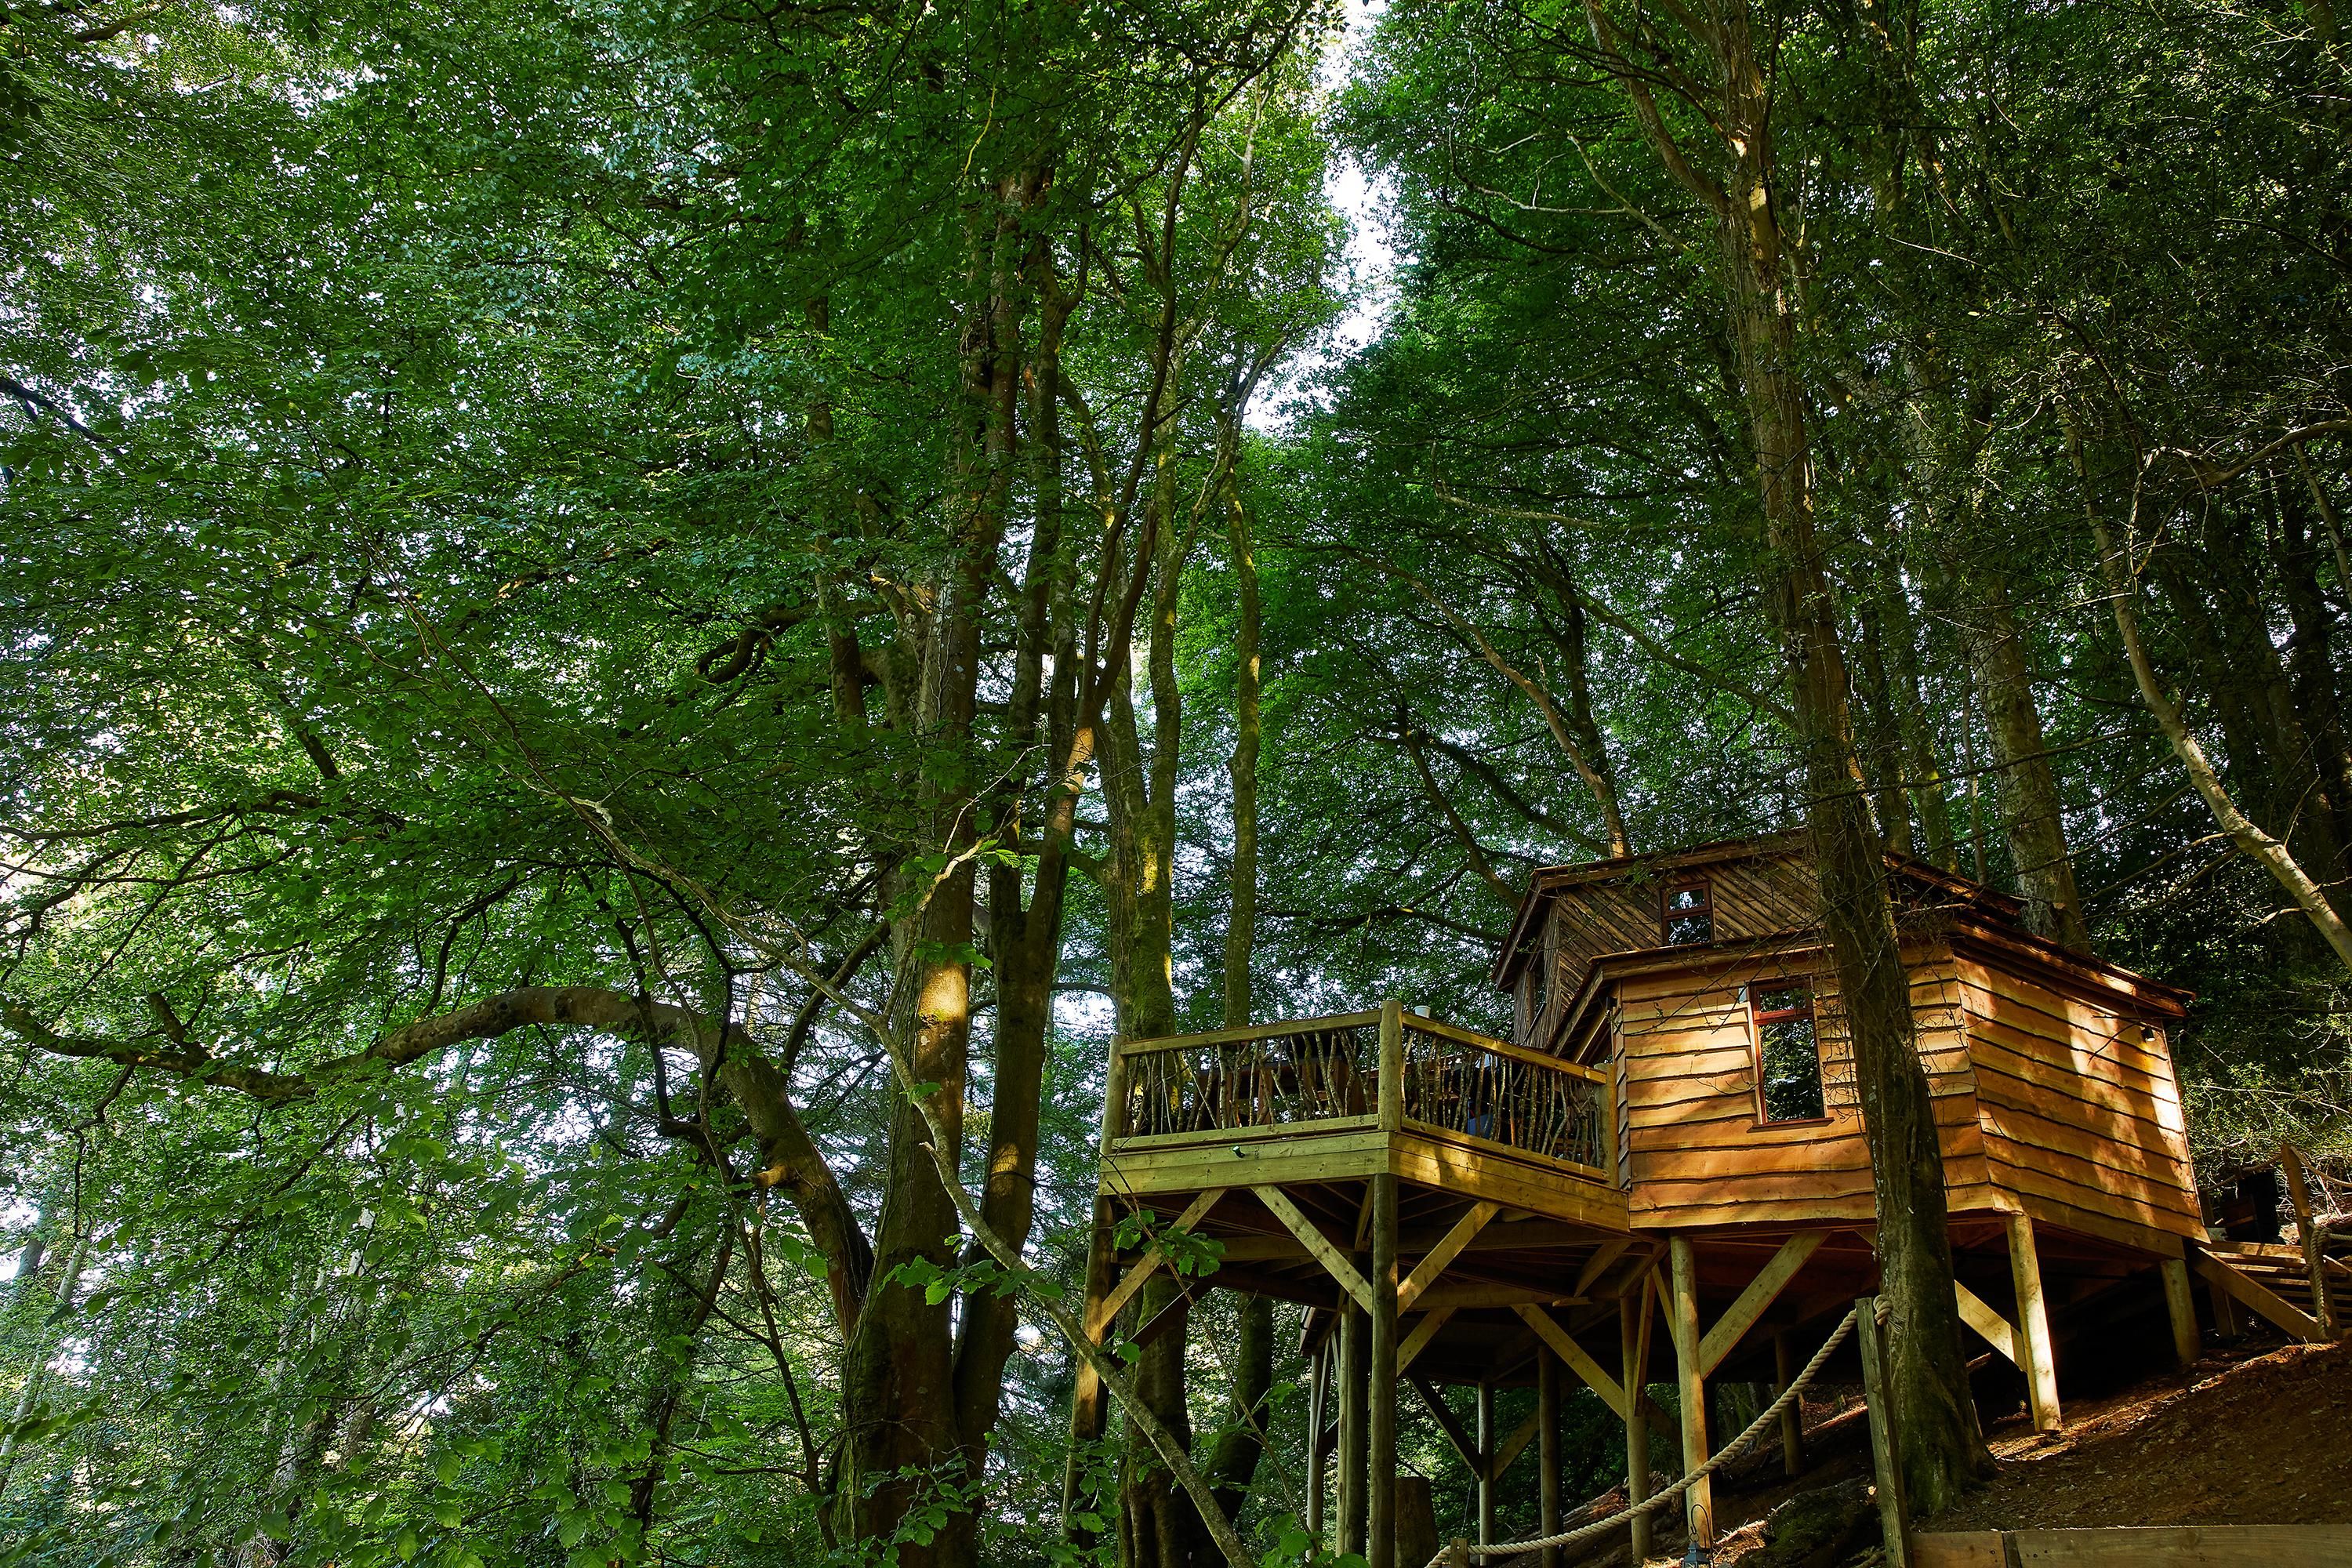 The outside of the treehouse 